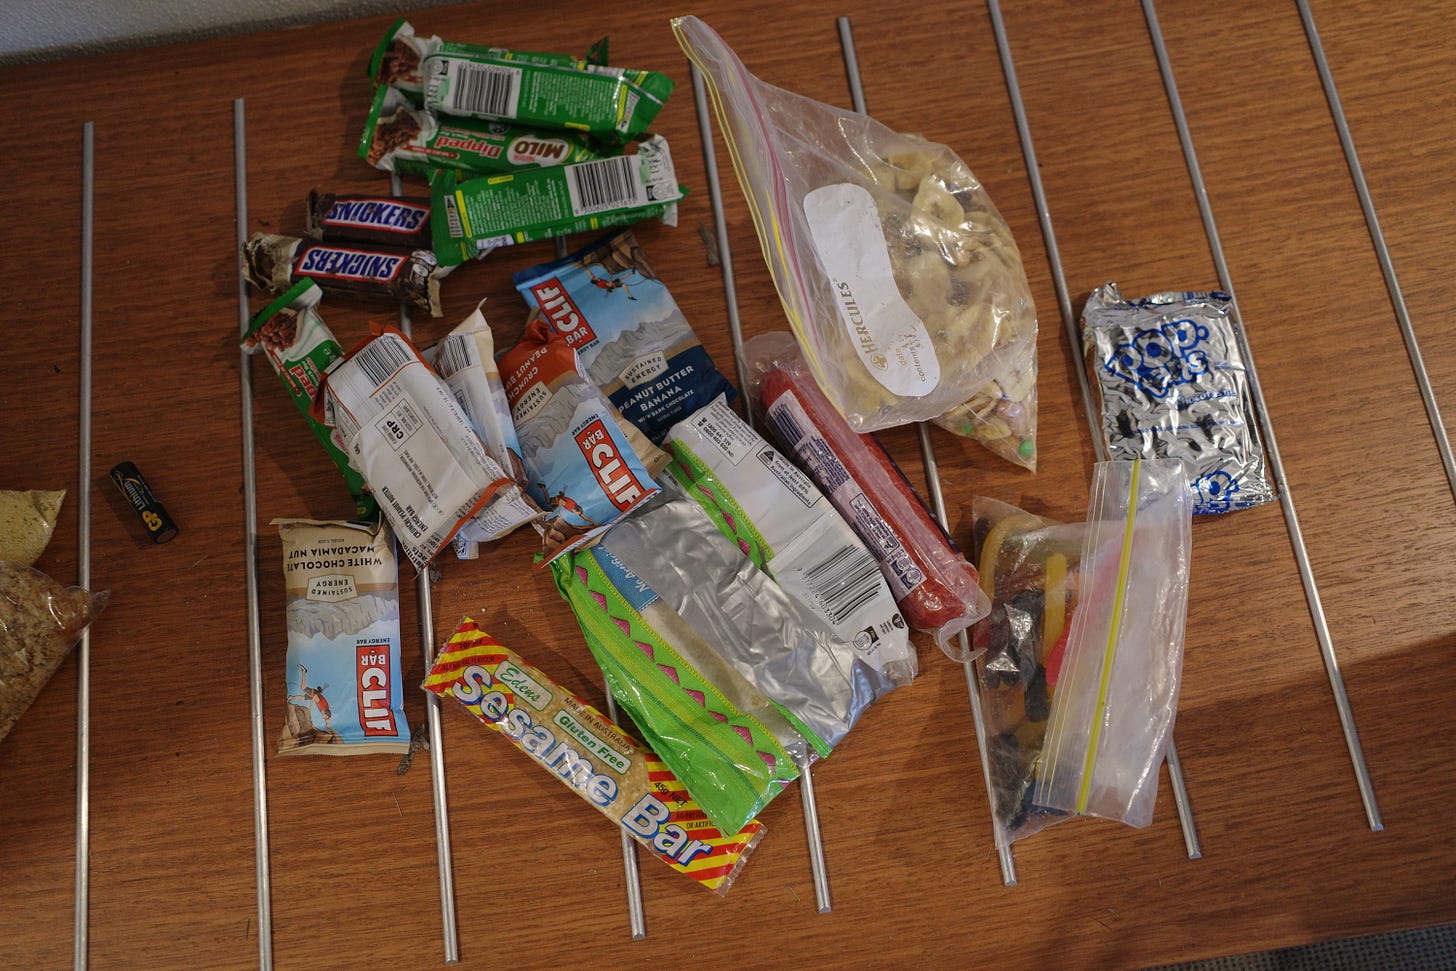 A spread of trail food, including Clif bars, Milo bars, Snickers